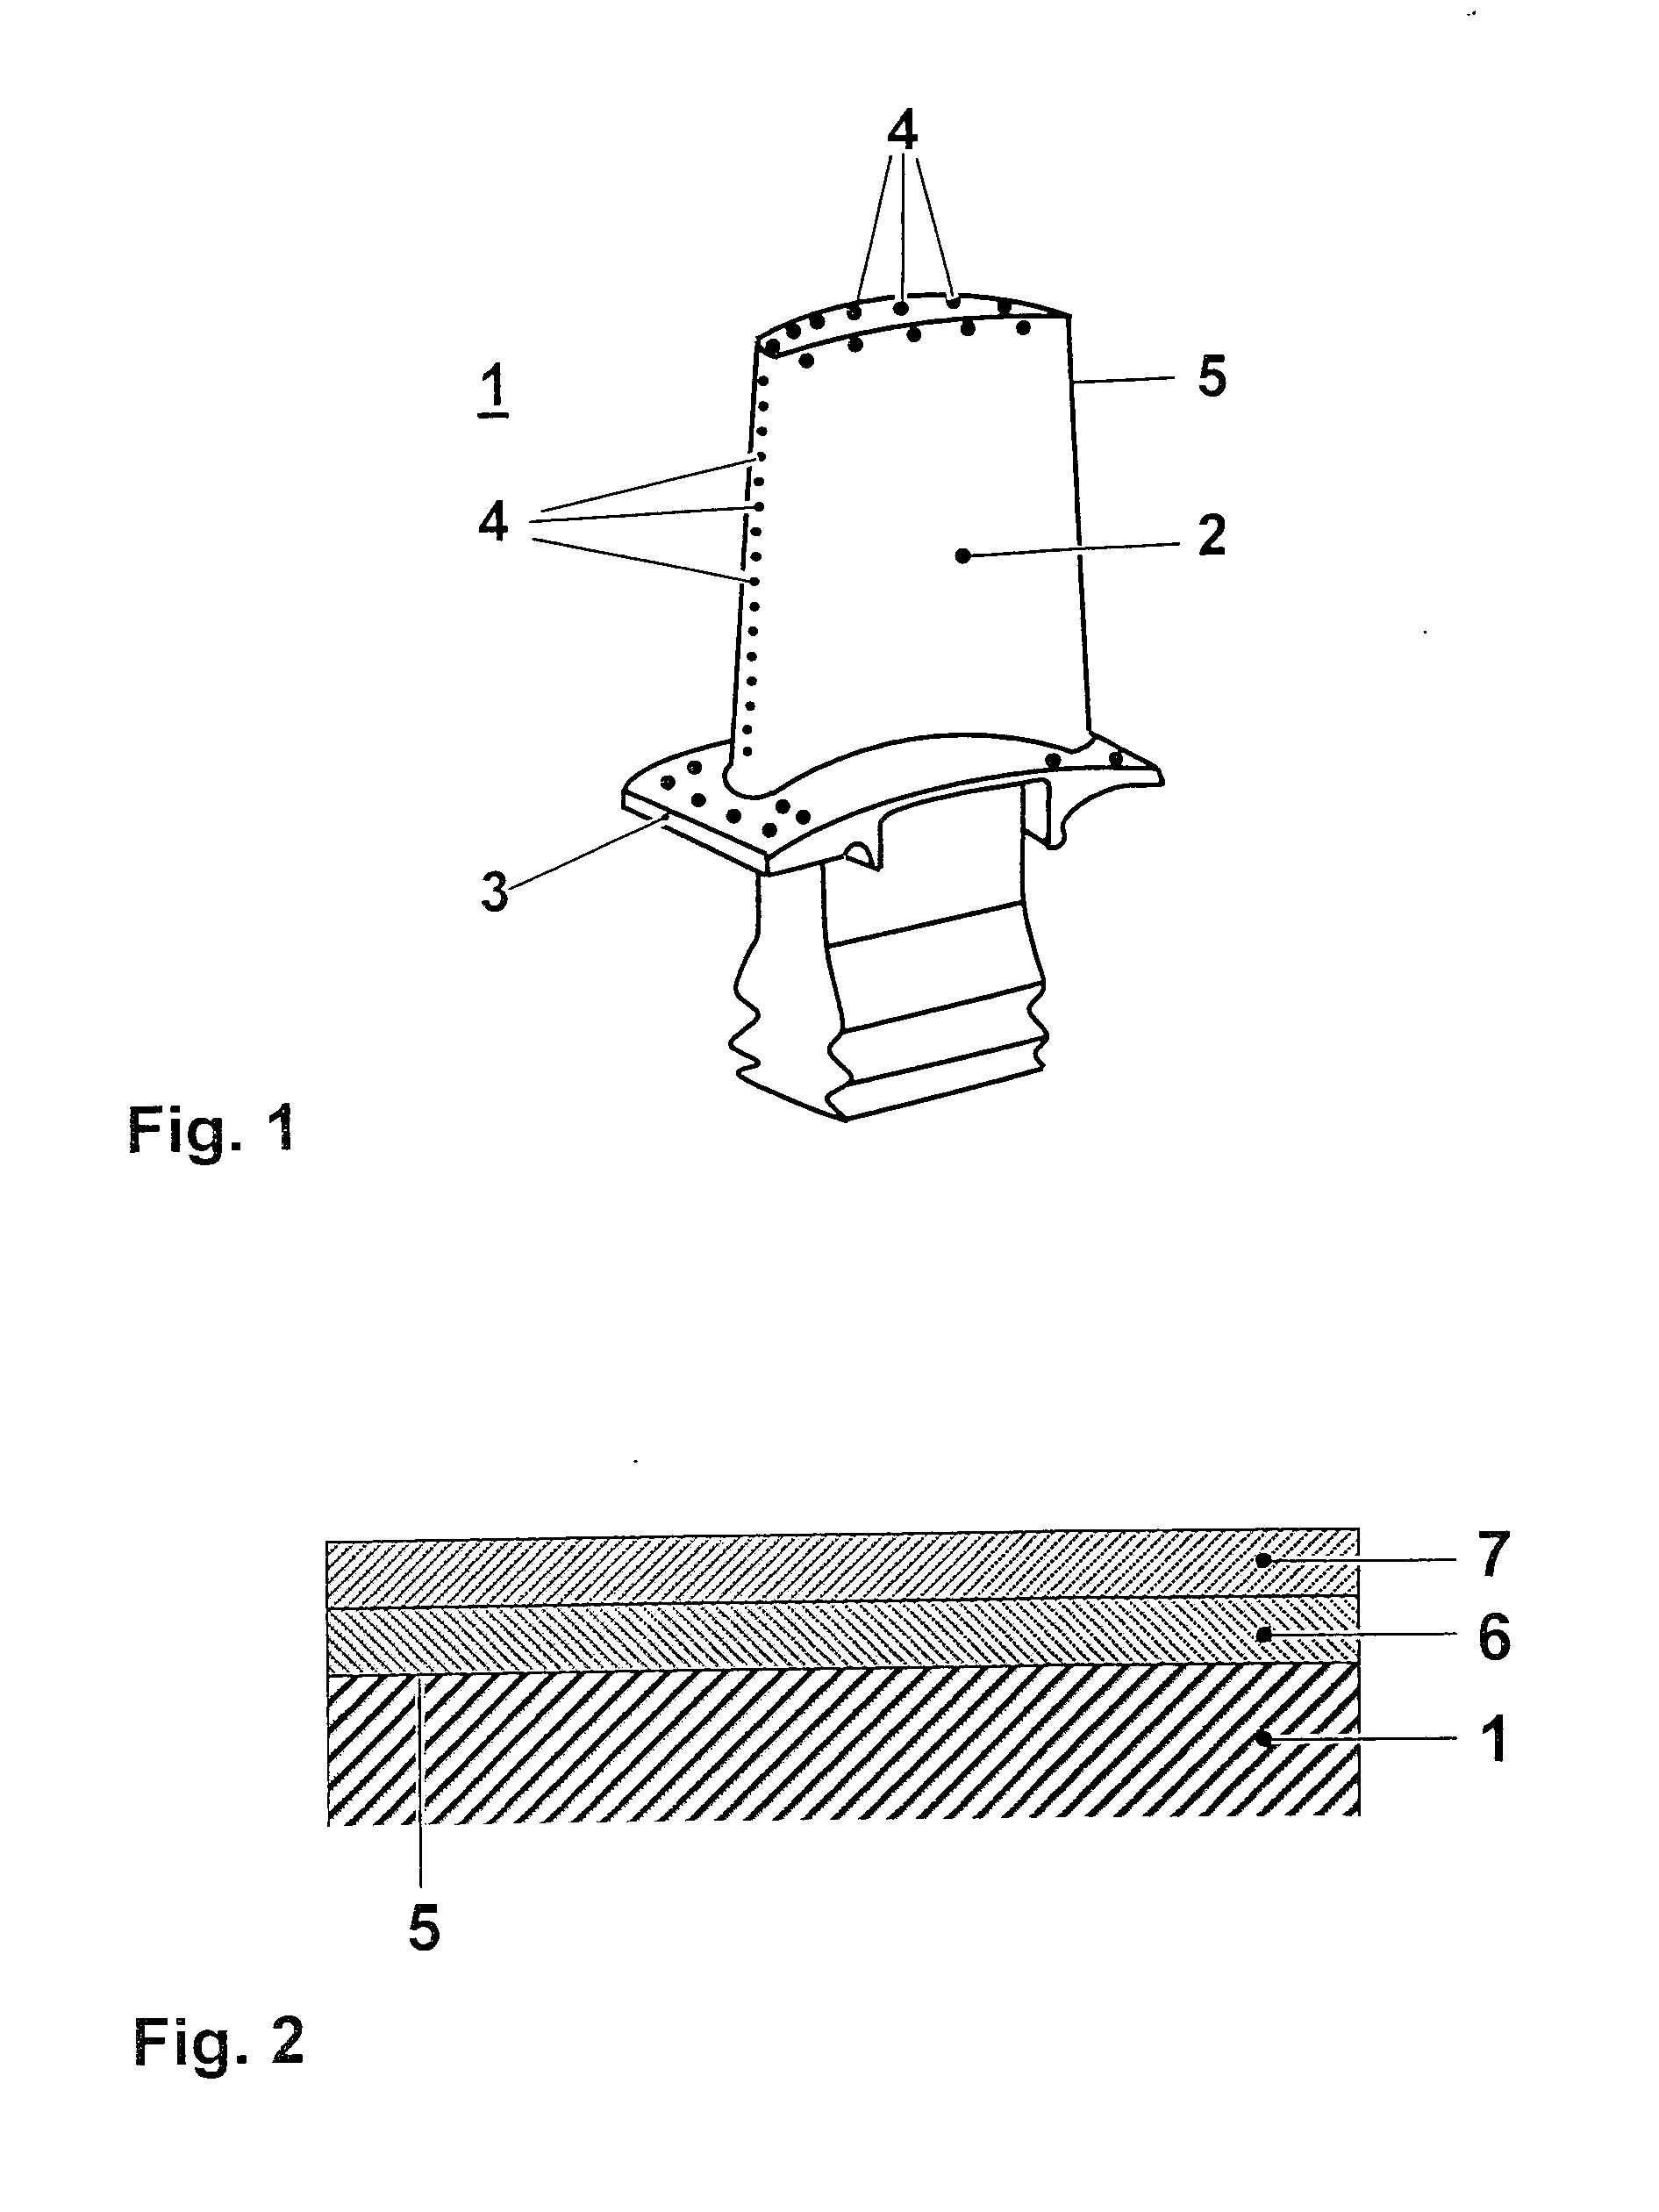 Method of depositing an oxidation and fatigue resistant MCrAIY-coating